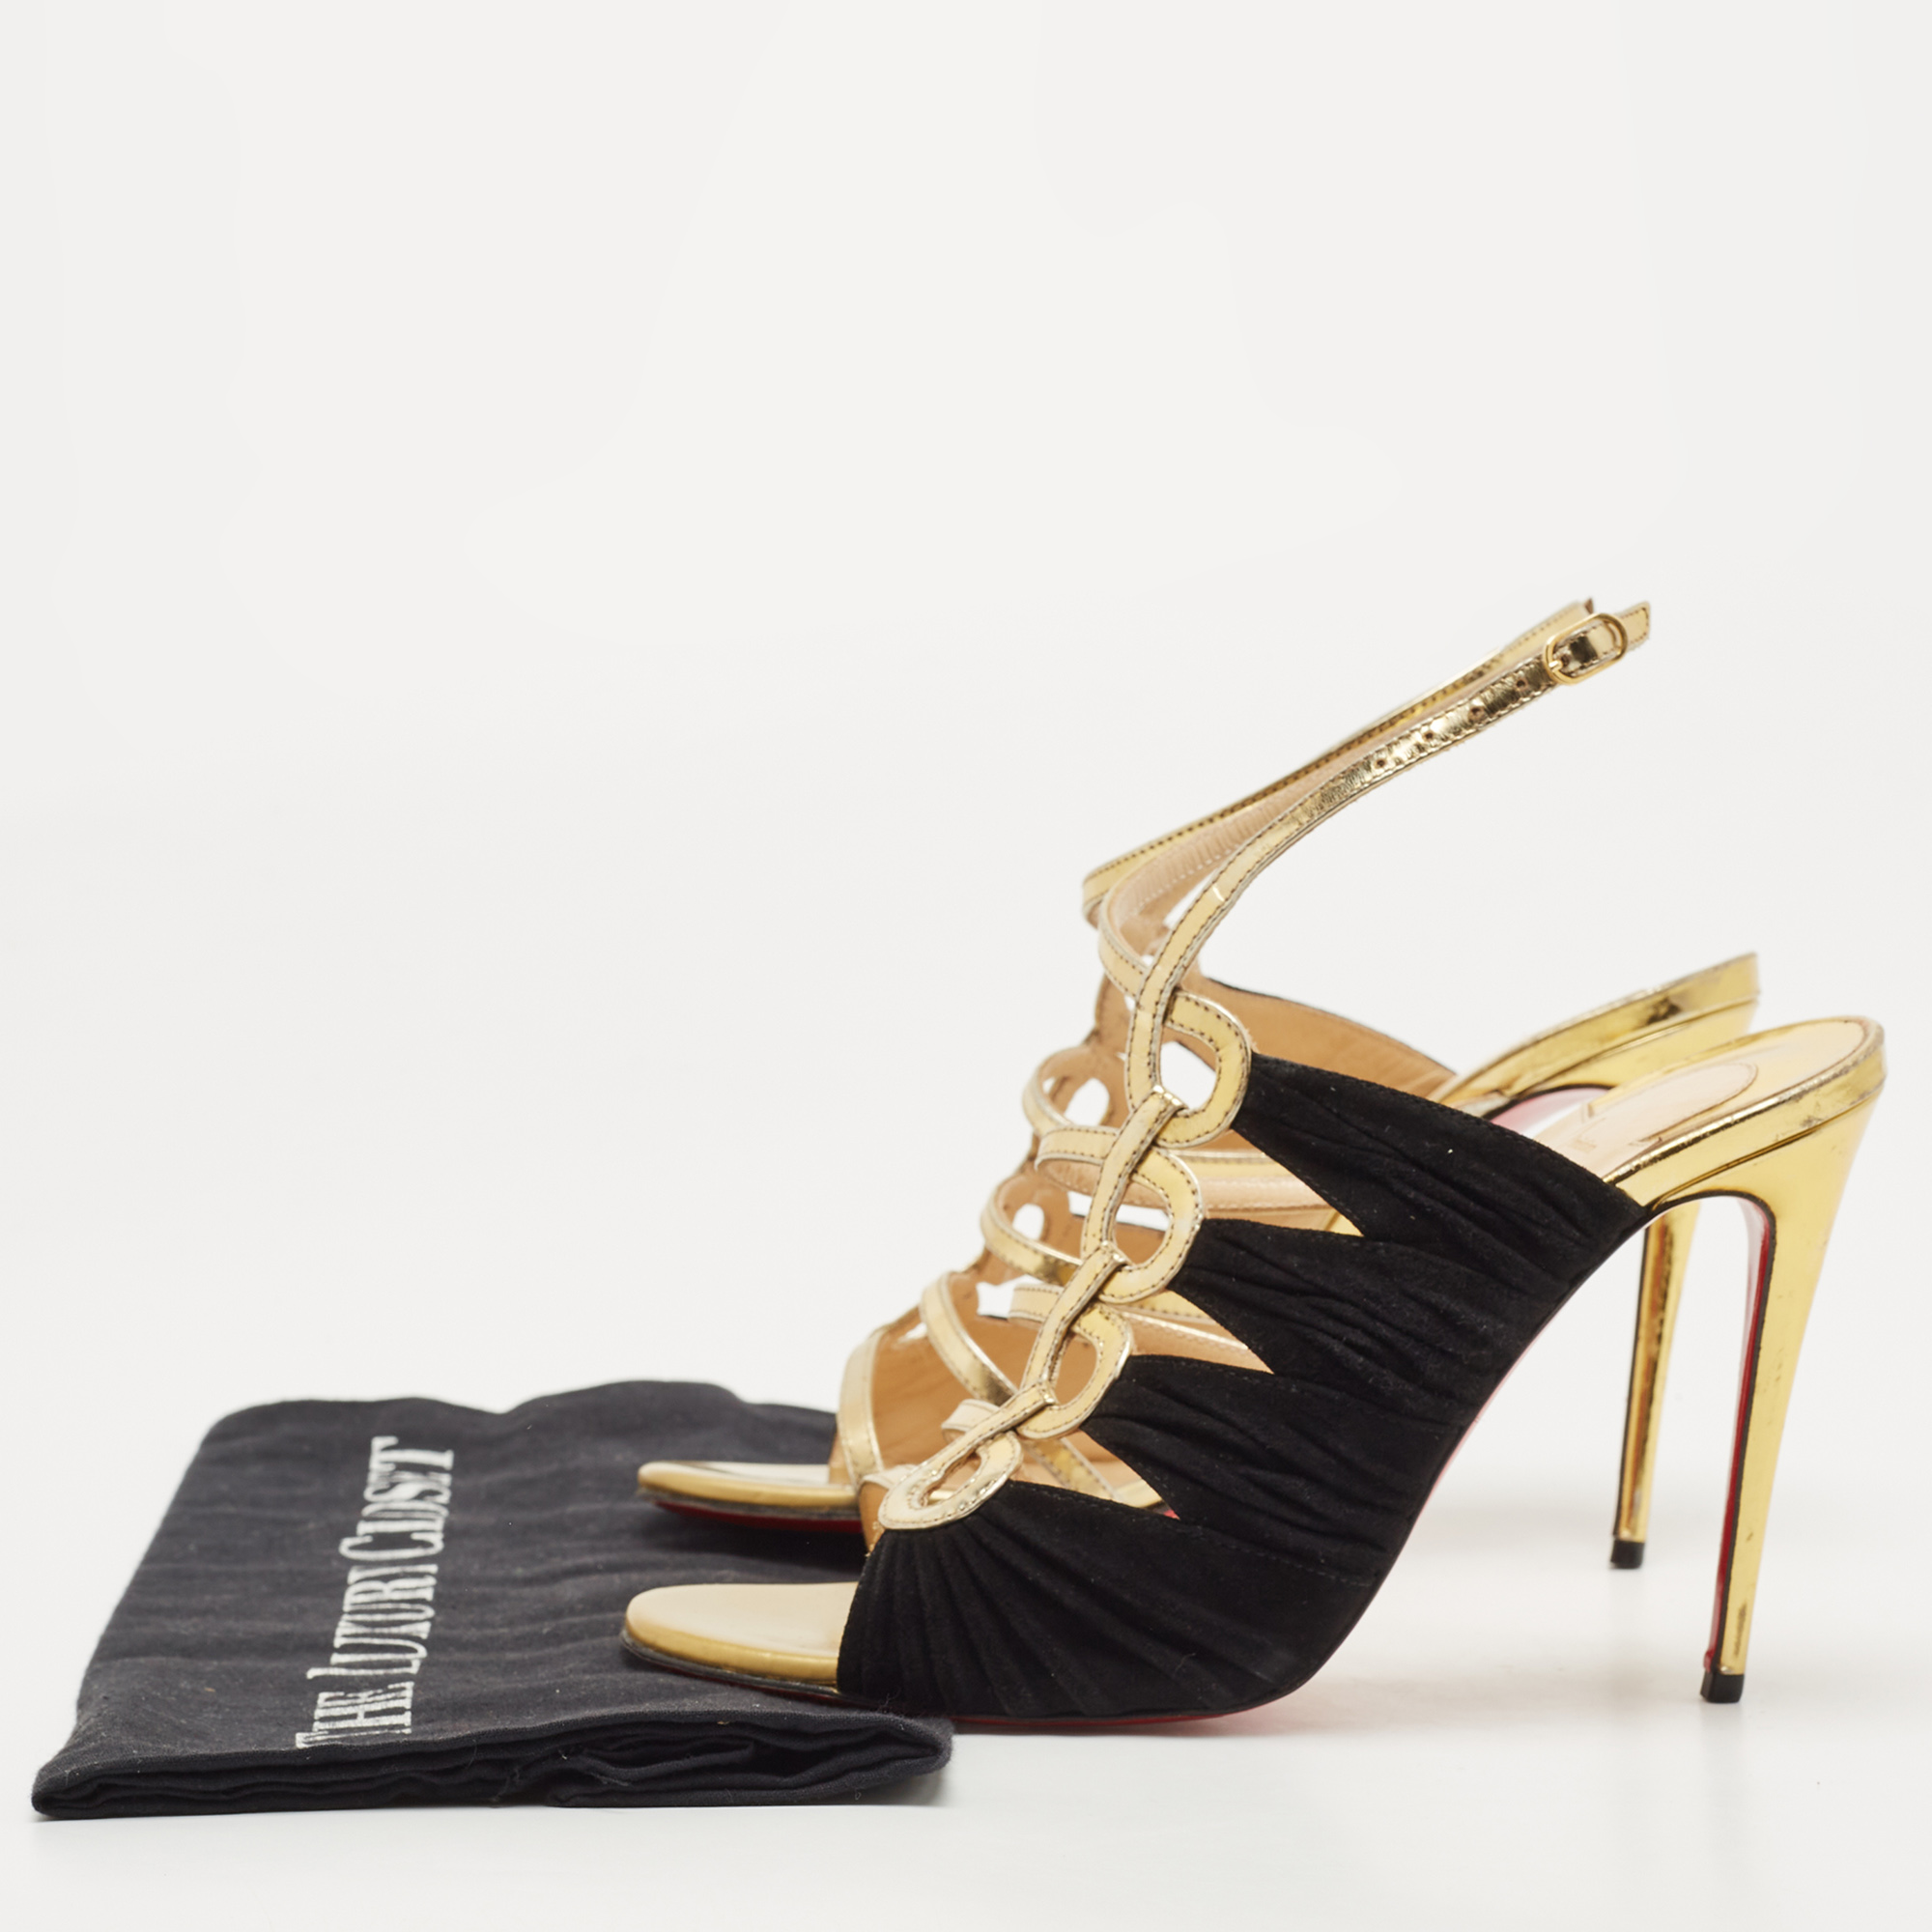 Christian Louboutin Black/Gold Suede And Leather Tina Sandals Size 37.5